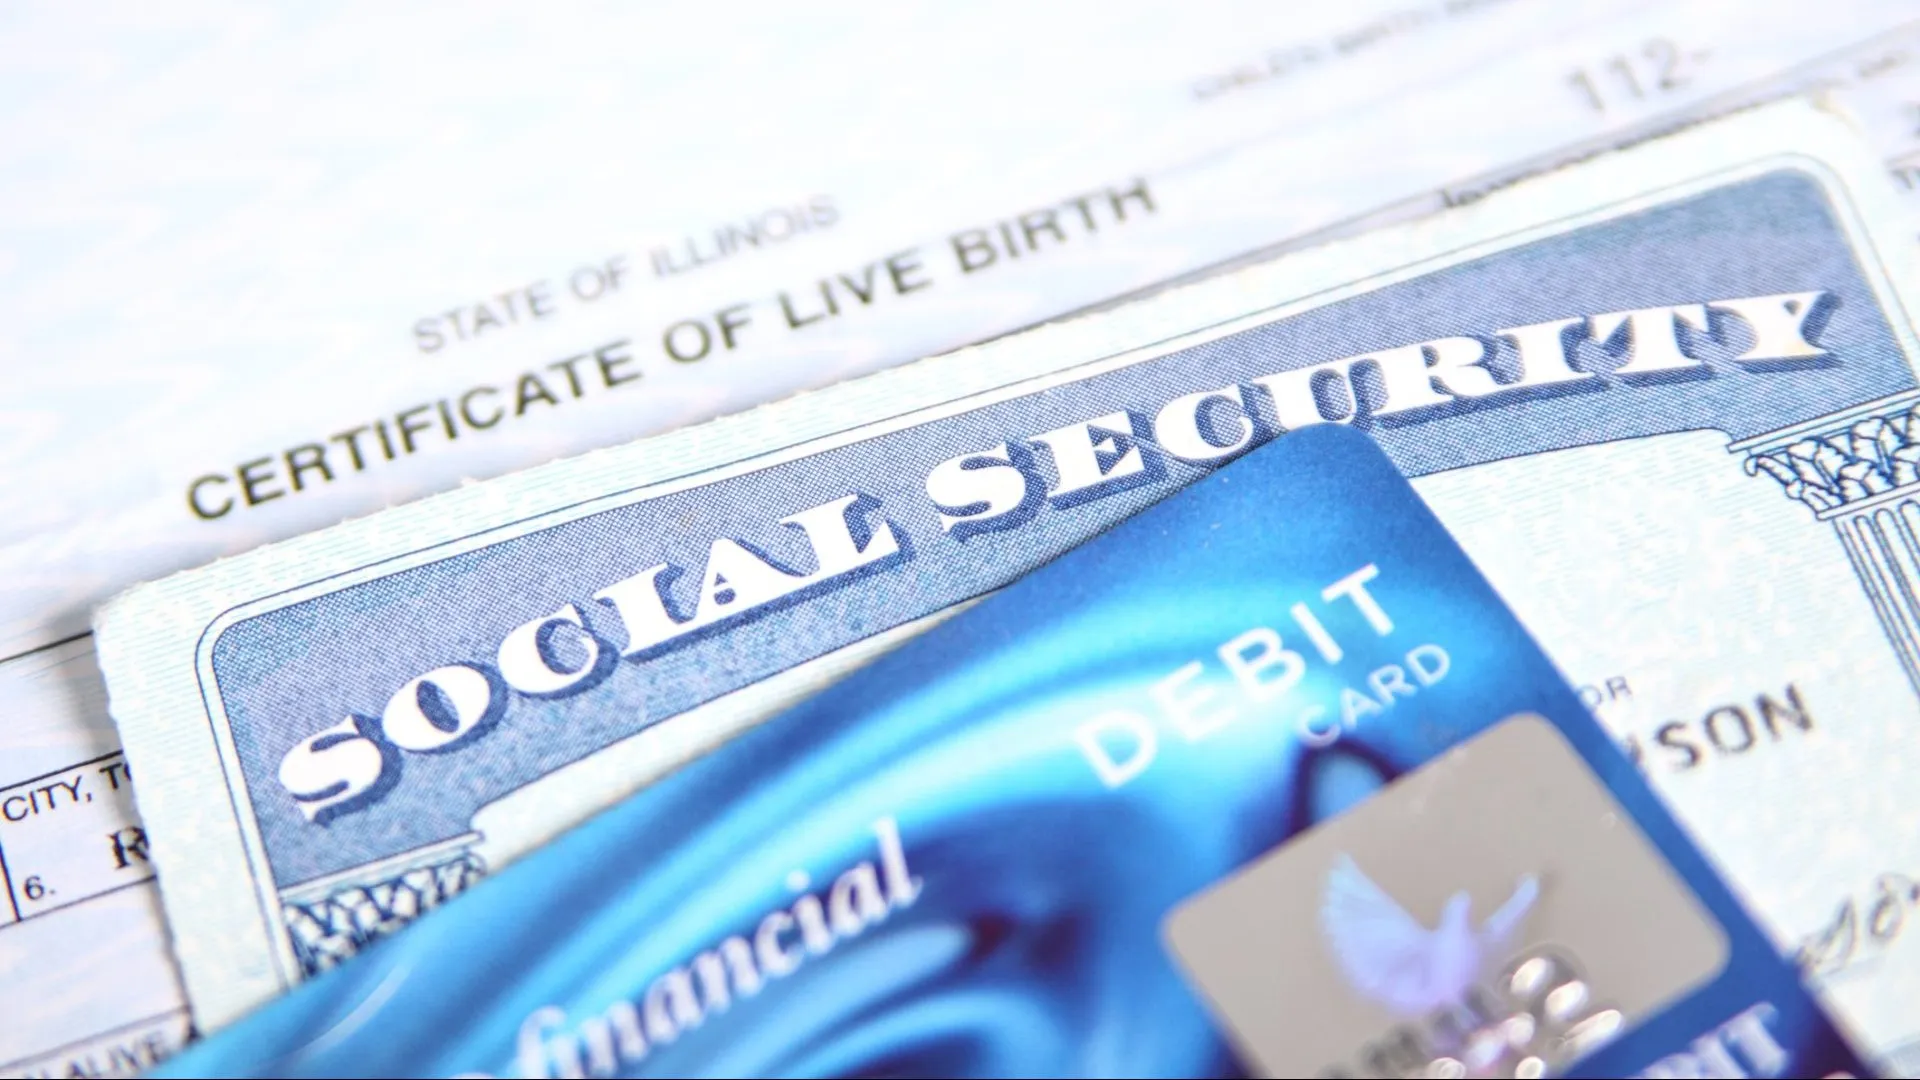 "Social Security Card, Birth Certificate, and Debit Card.